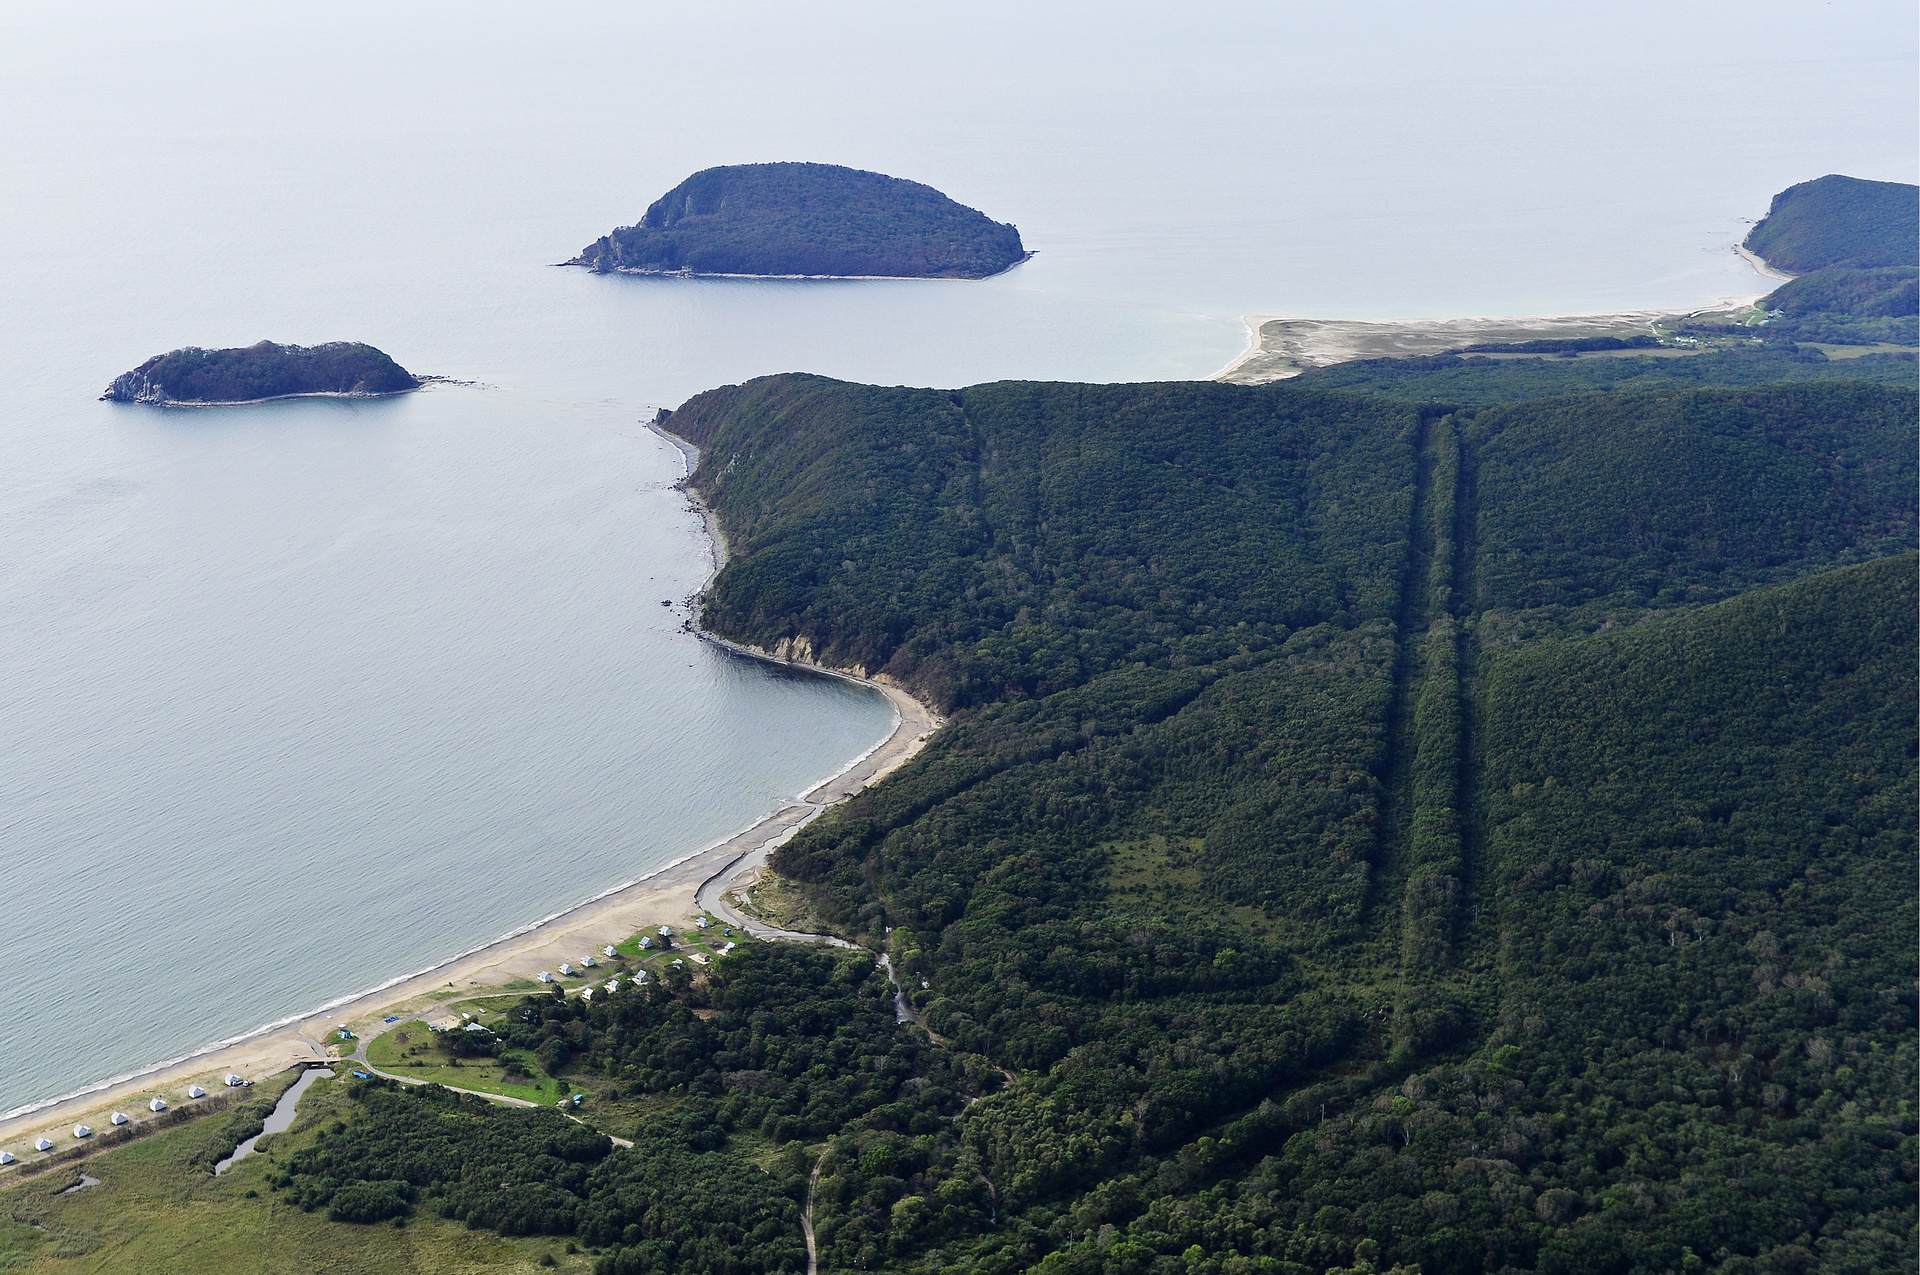 Primorye Territory, Russia, in pictures